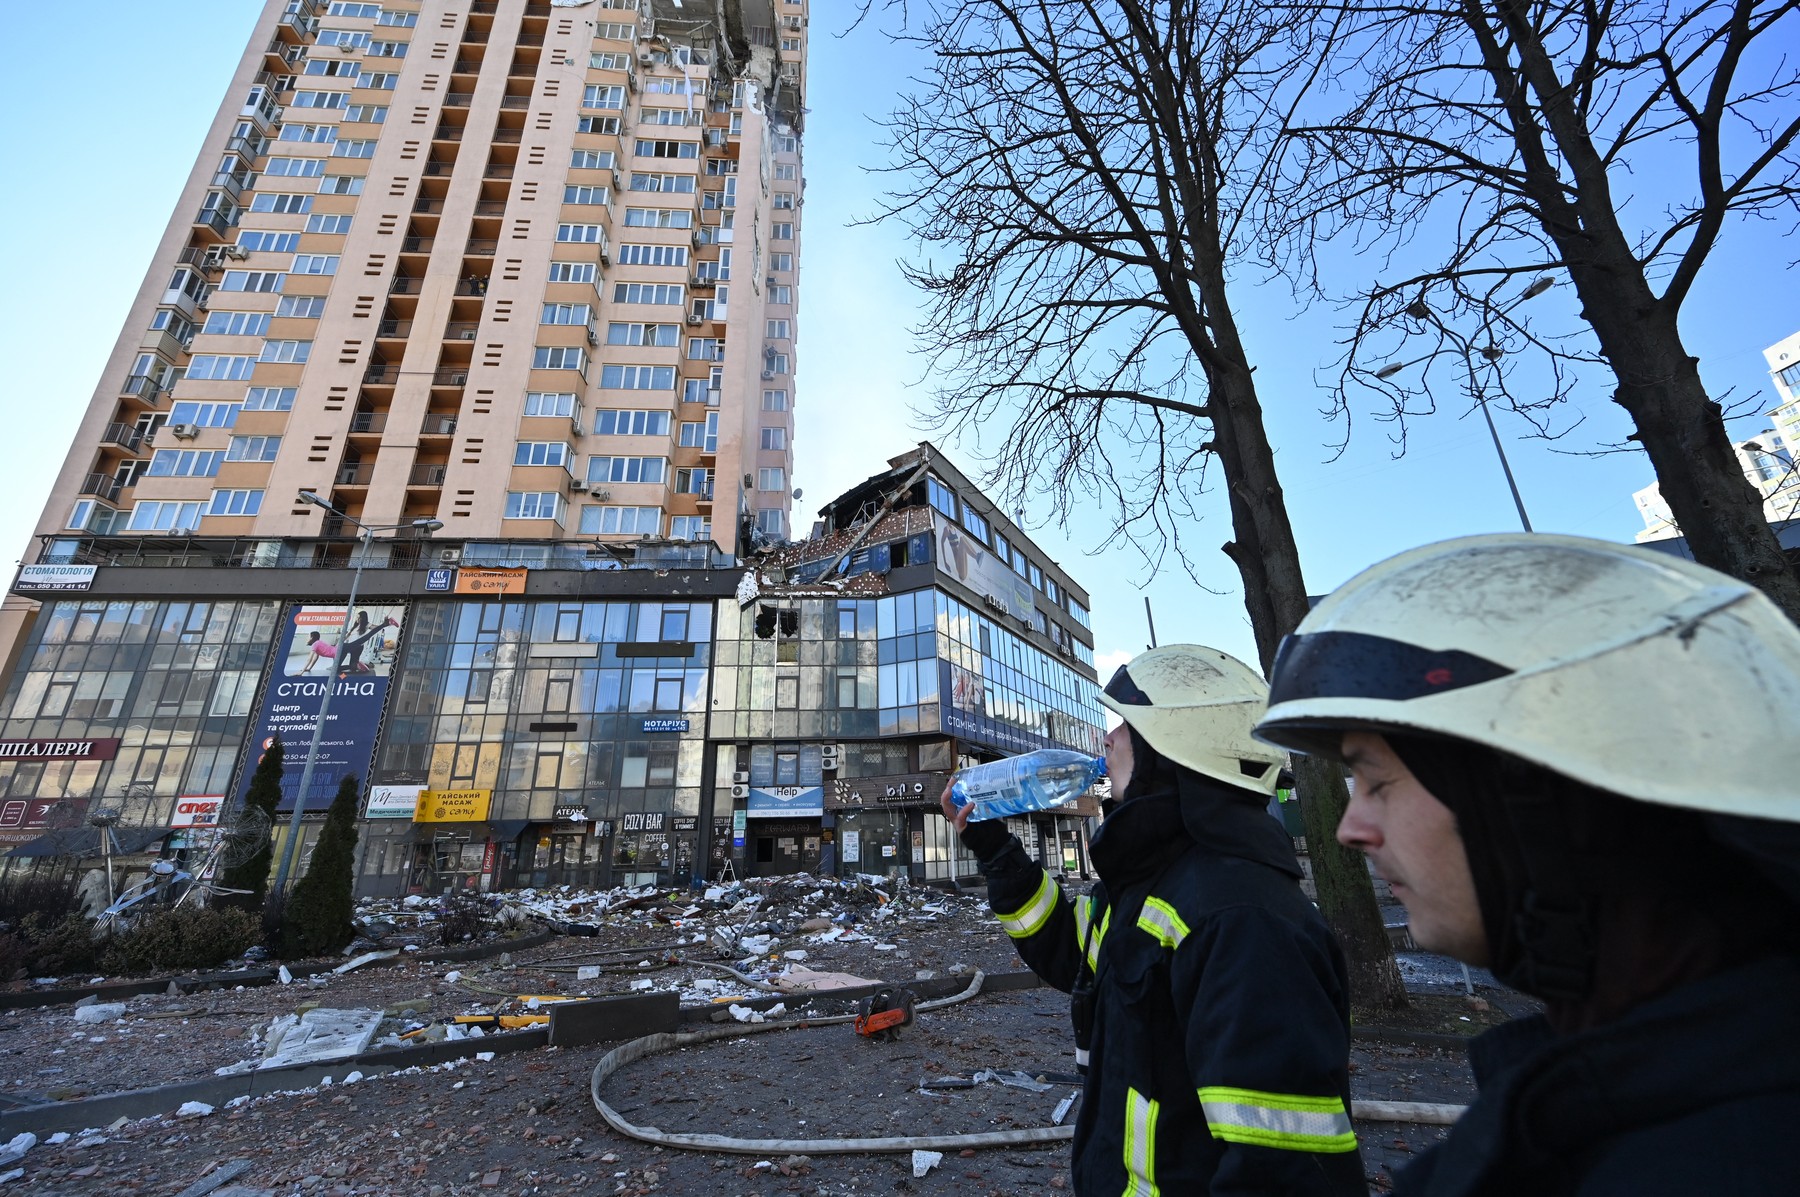 Firefighters work by a high-rise apartment block which was hit by recent shelling in Kyiv on February 26, 2022. Ukrainian soldiers repulsed a Russian attack in the capital, the military said on February 26 after a defiant President Volodymyr Zelensky vowed his pro-Western country would not be bowed by Moscow. It started the third day since Russian leader Vladimir Putin unleashed a full-scale invasion that has killed dozens of people, forced more than 50,000 to flee Ukraine in just 48 hours and sparked fears of a wider conflict in Europe.,Image: 665052431, License: Rights-managed, Restrictions: , Model Release: no, Credit line: Profimedia